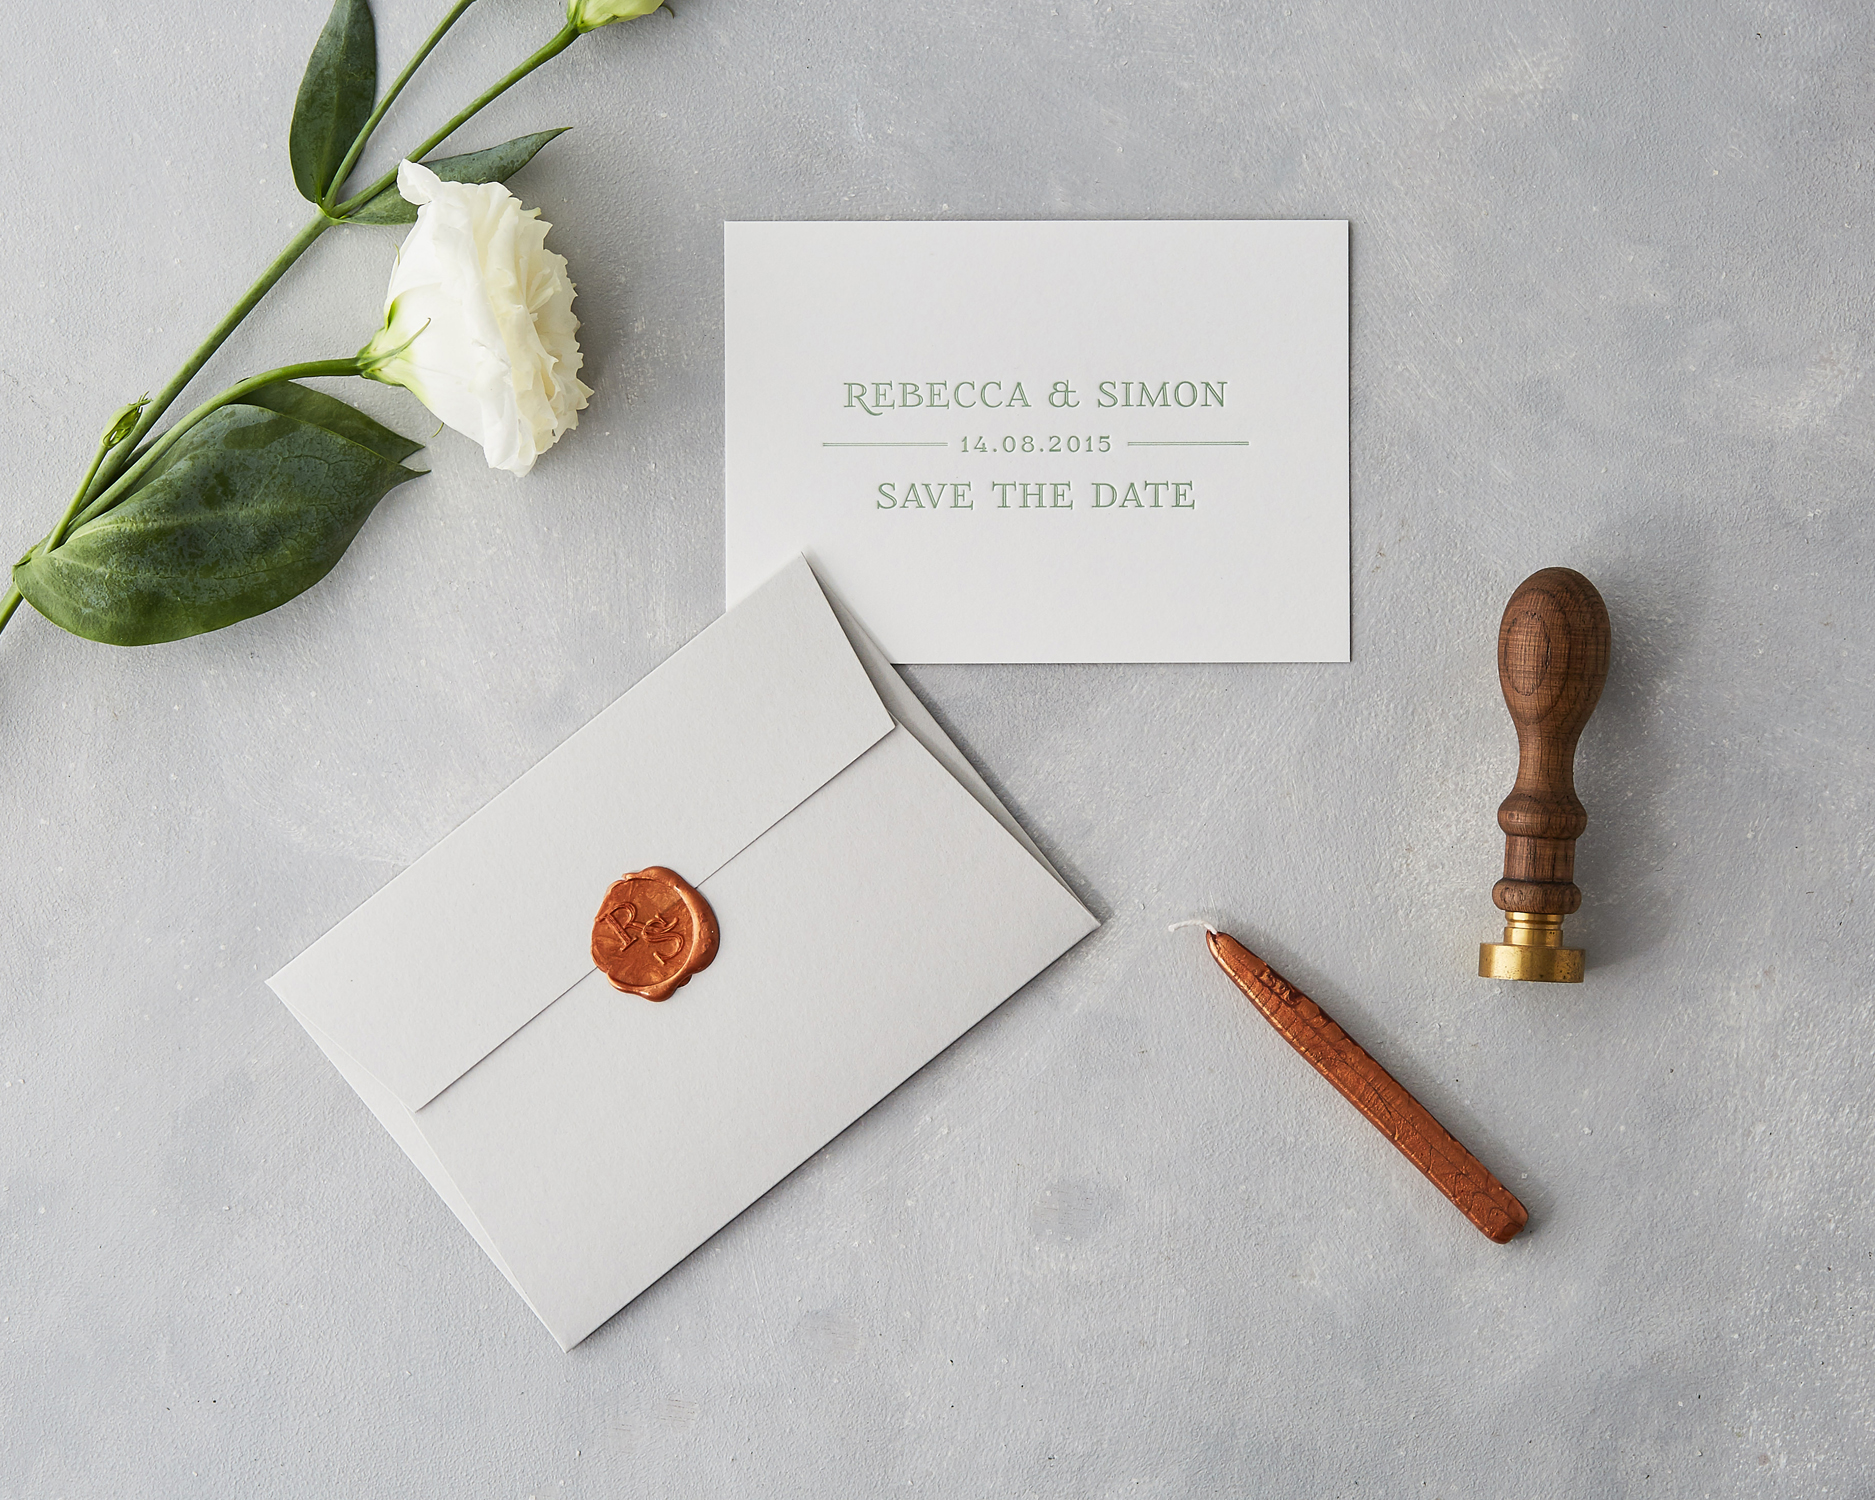 Save the date Self-adhesive wax seal| wax seal stamp| Stamp| Wax Seals announcements For weddings baptisms invitations